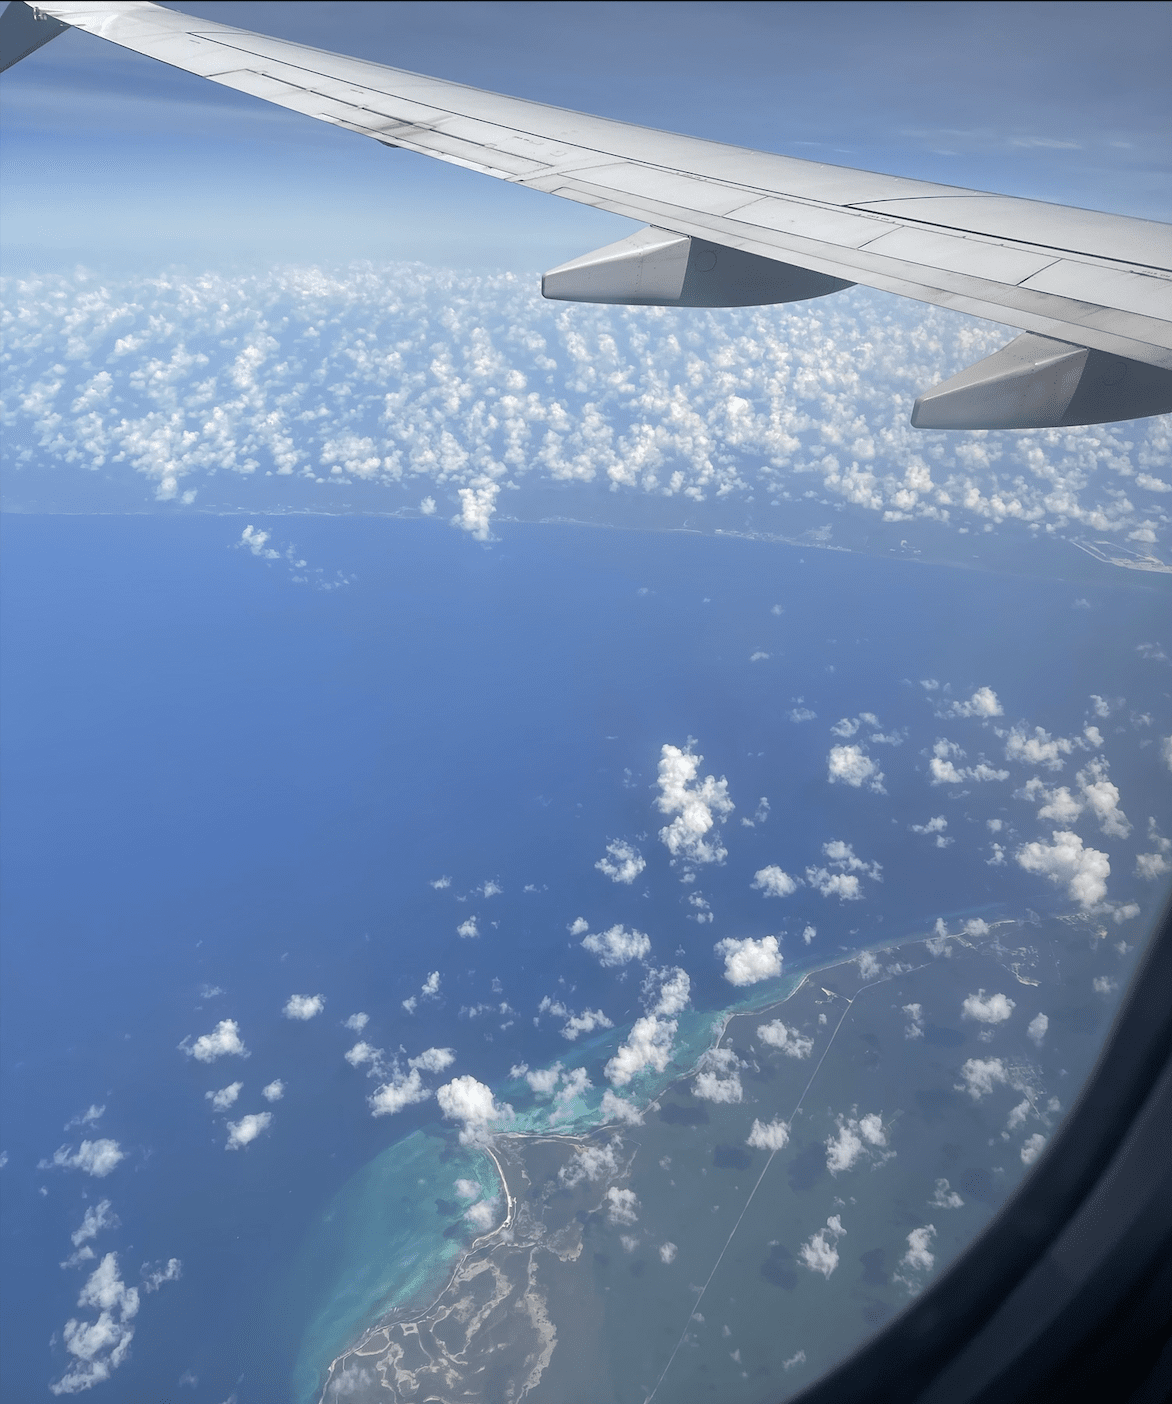 air travel is the worst - here's a beautiful view out of a plane window